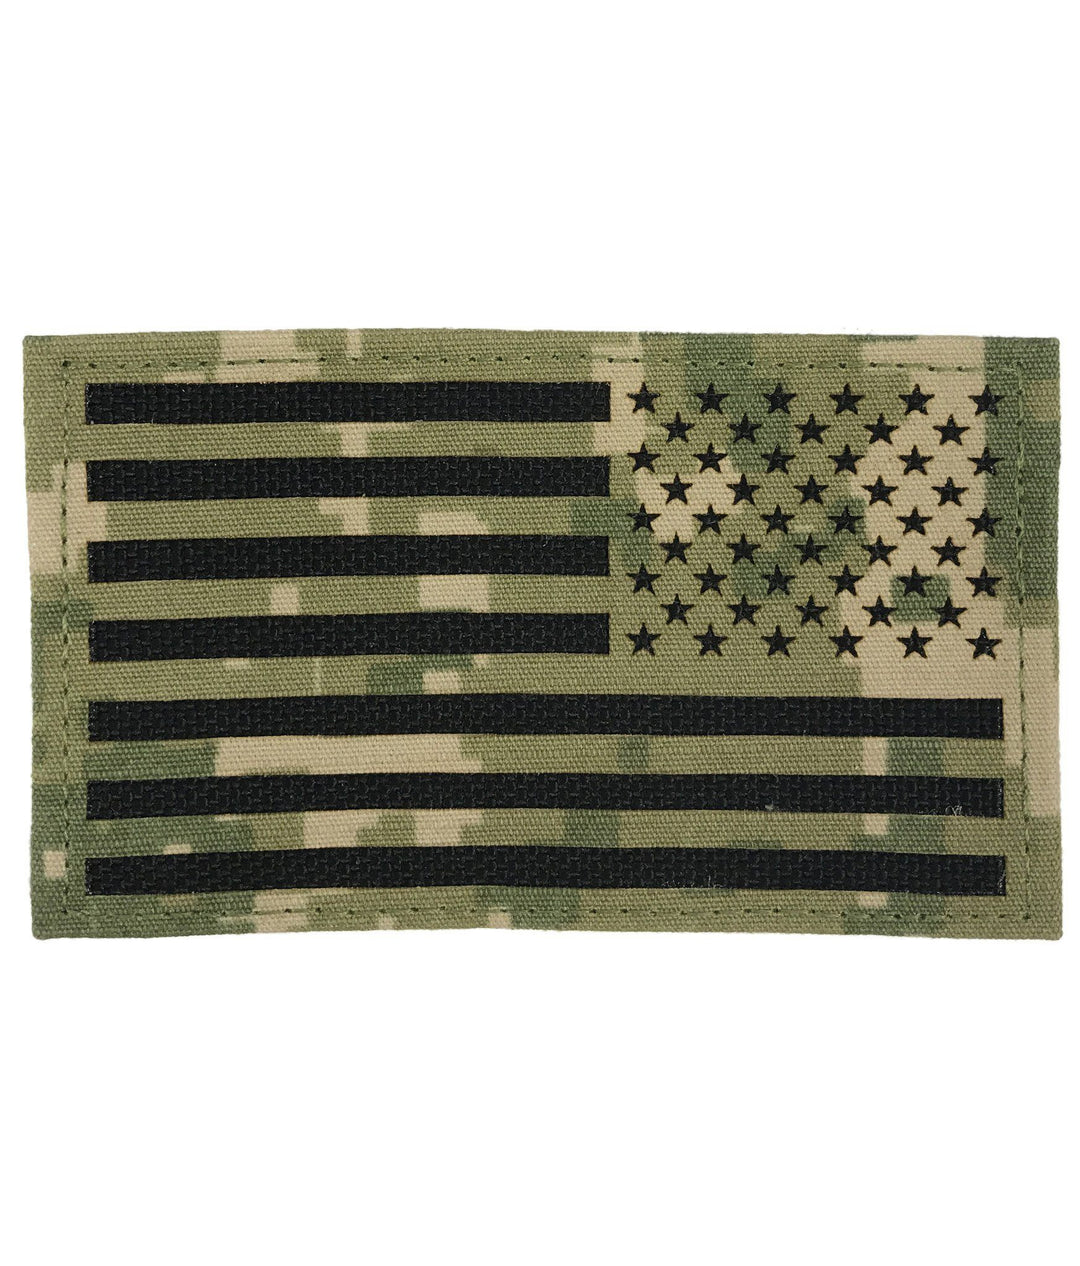 IR.Tools™ GARRISON Infrared IR Reverse American US Flag Patch, Offbase  Supply Co.